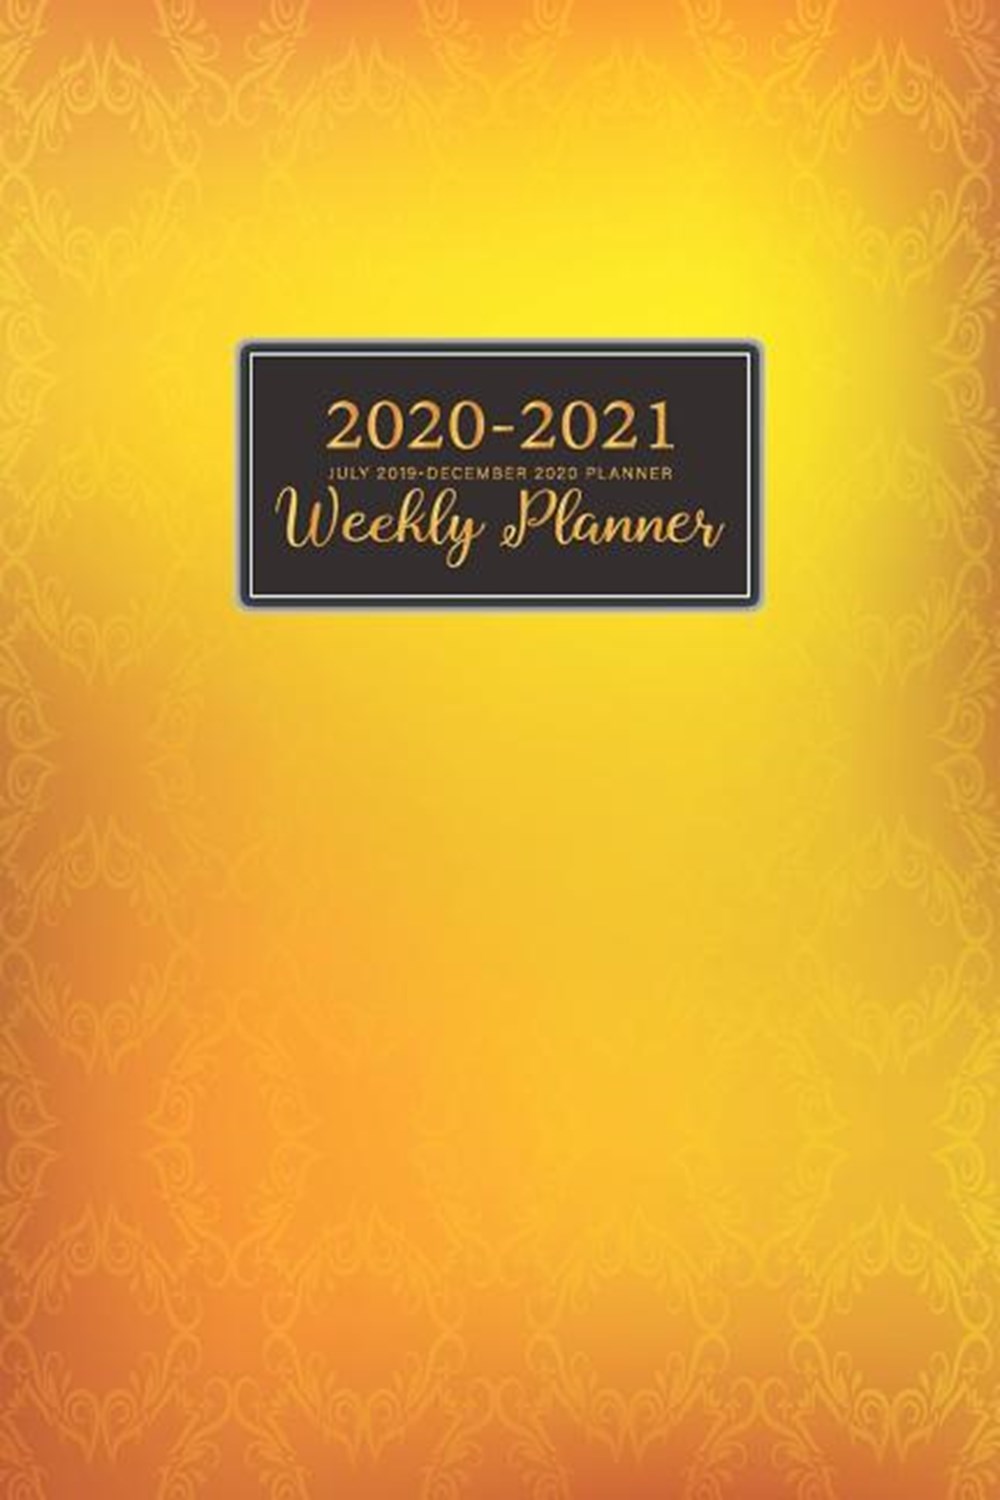 2019-2020 (July 2019-December 2020 Planner) Bokeh Background 18 Month Weekly Planner Daily Planner T